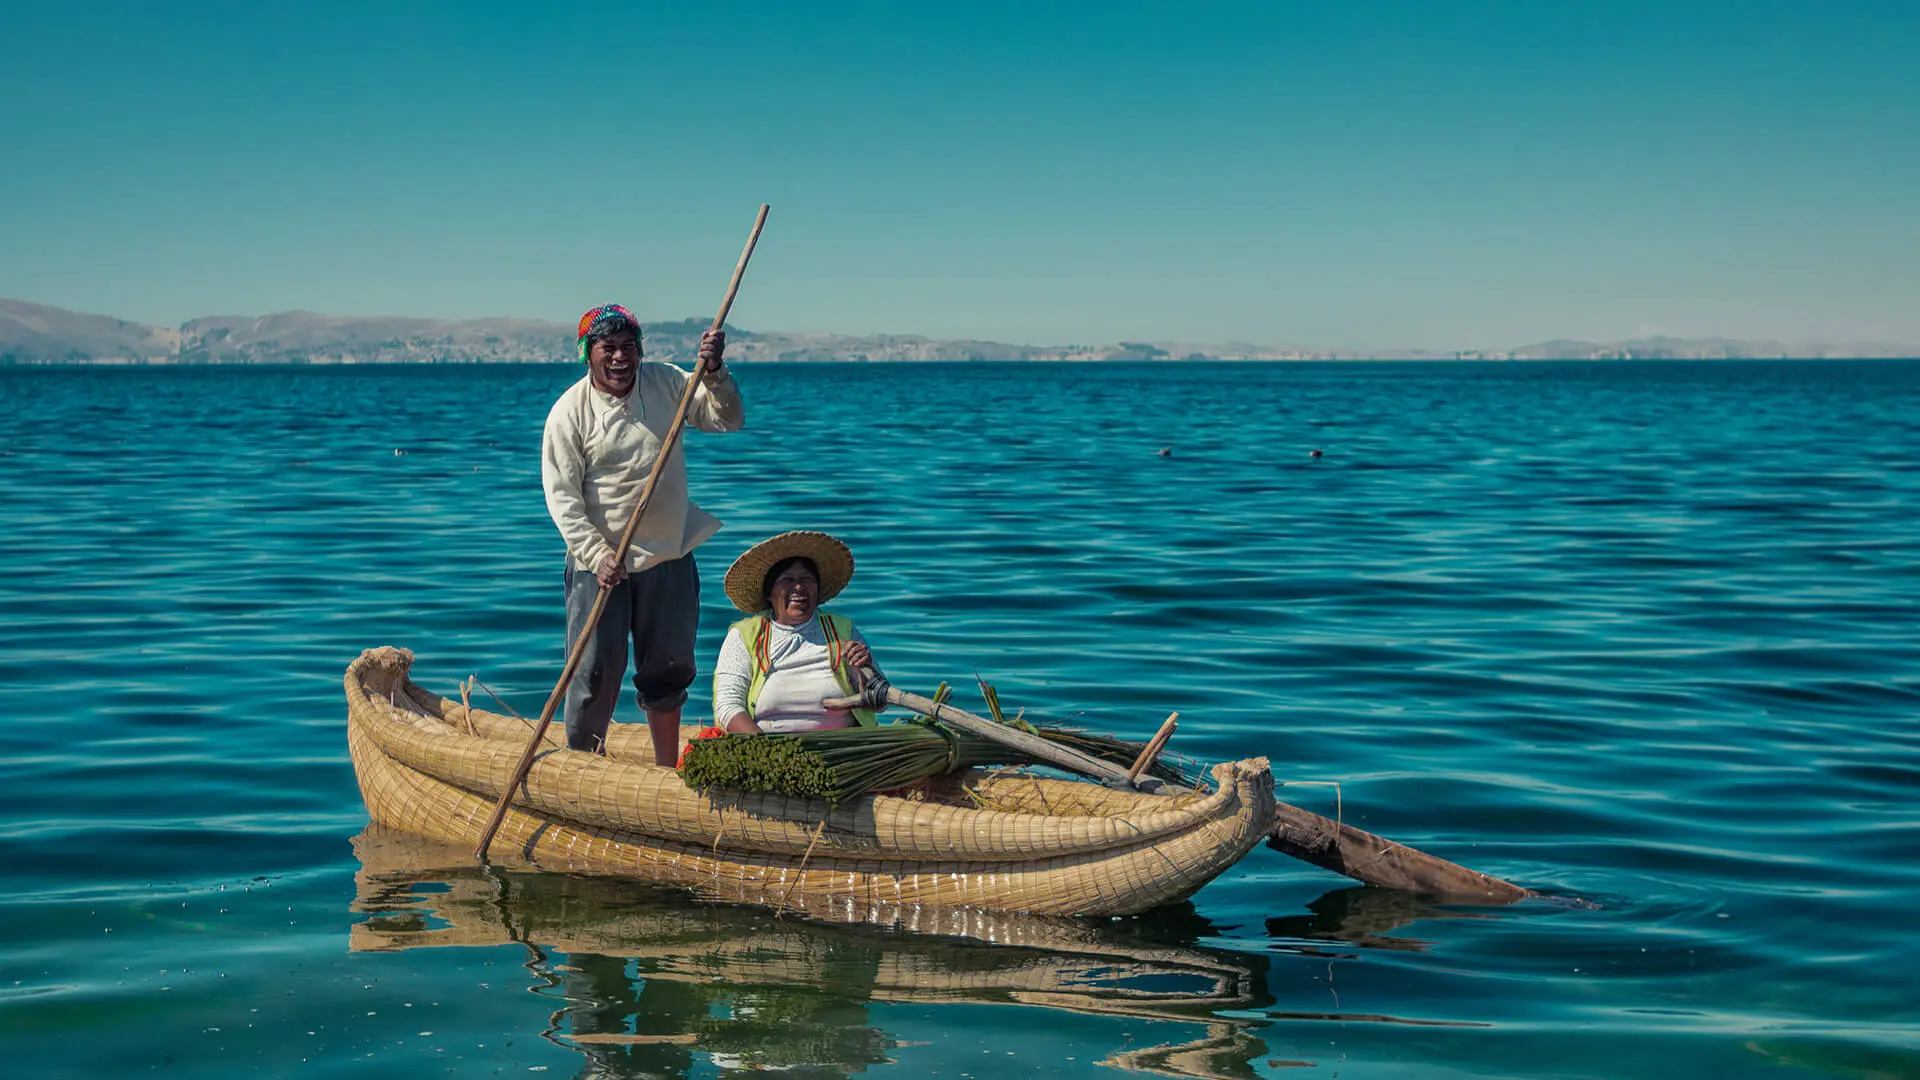 Man and woman over a totora boat after harvesting reeds in Titicaca